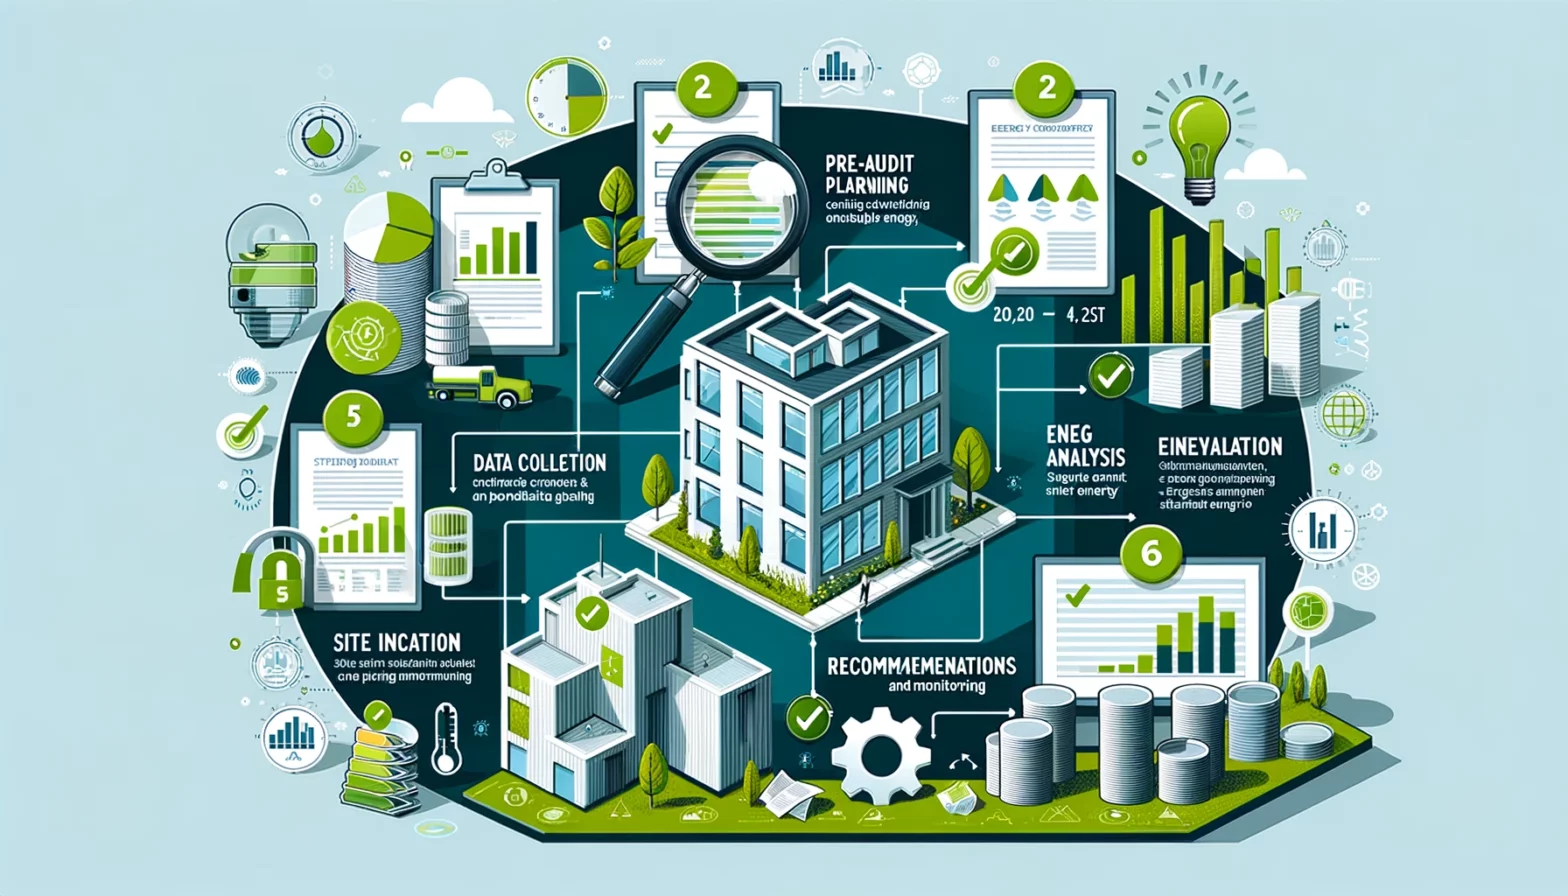 A detailed infographic depicting the key steps in conducting an energy audit for sustainable energy, including pre-audit planning, data collection, energy analysis, site inspection, recommendations, and implementation and monitoring, with icons and green and blue accents.